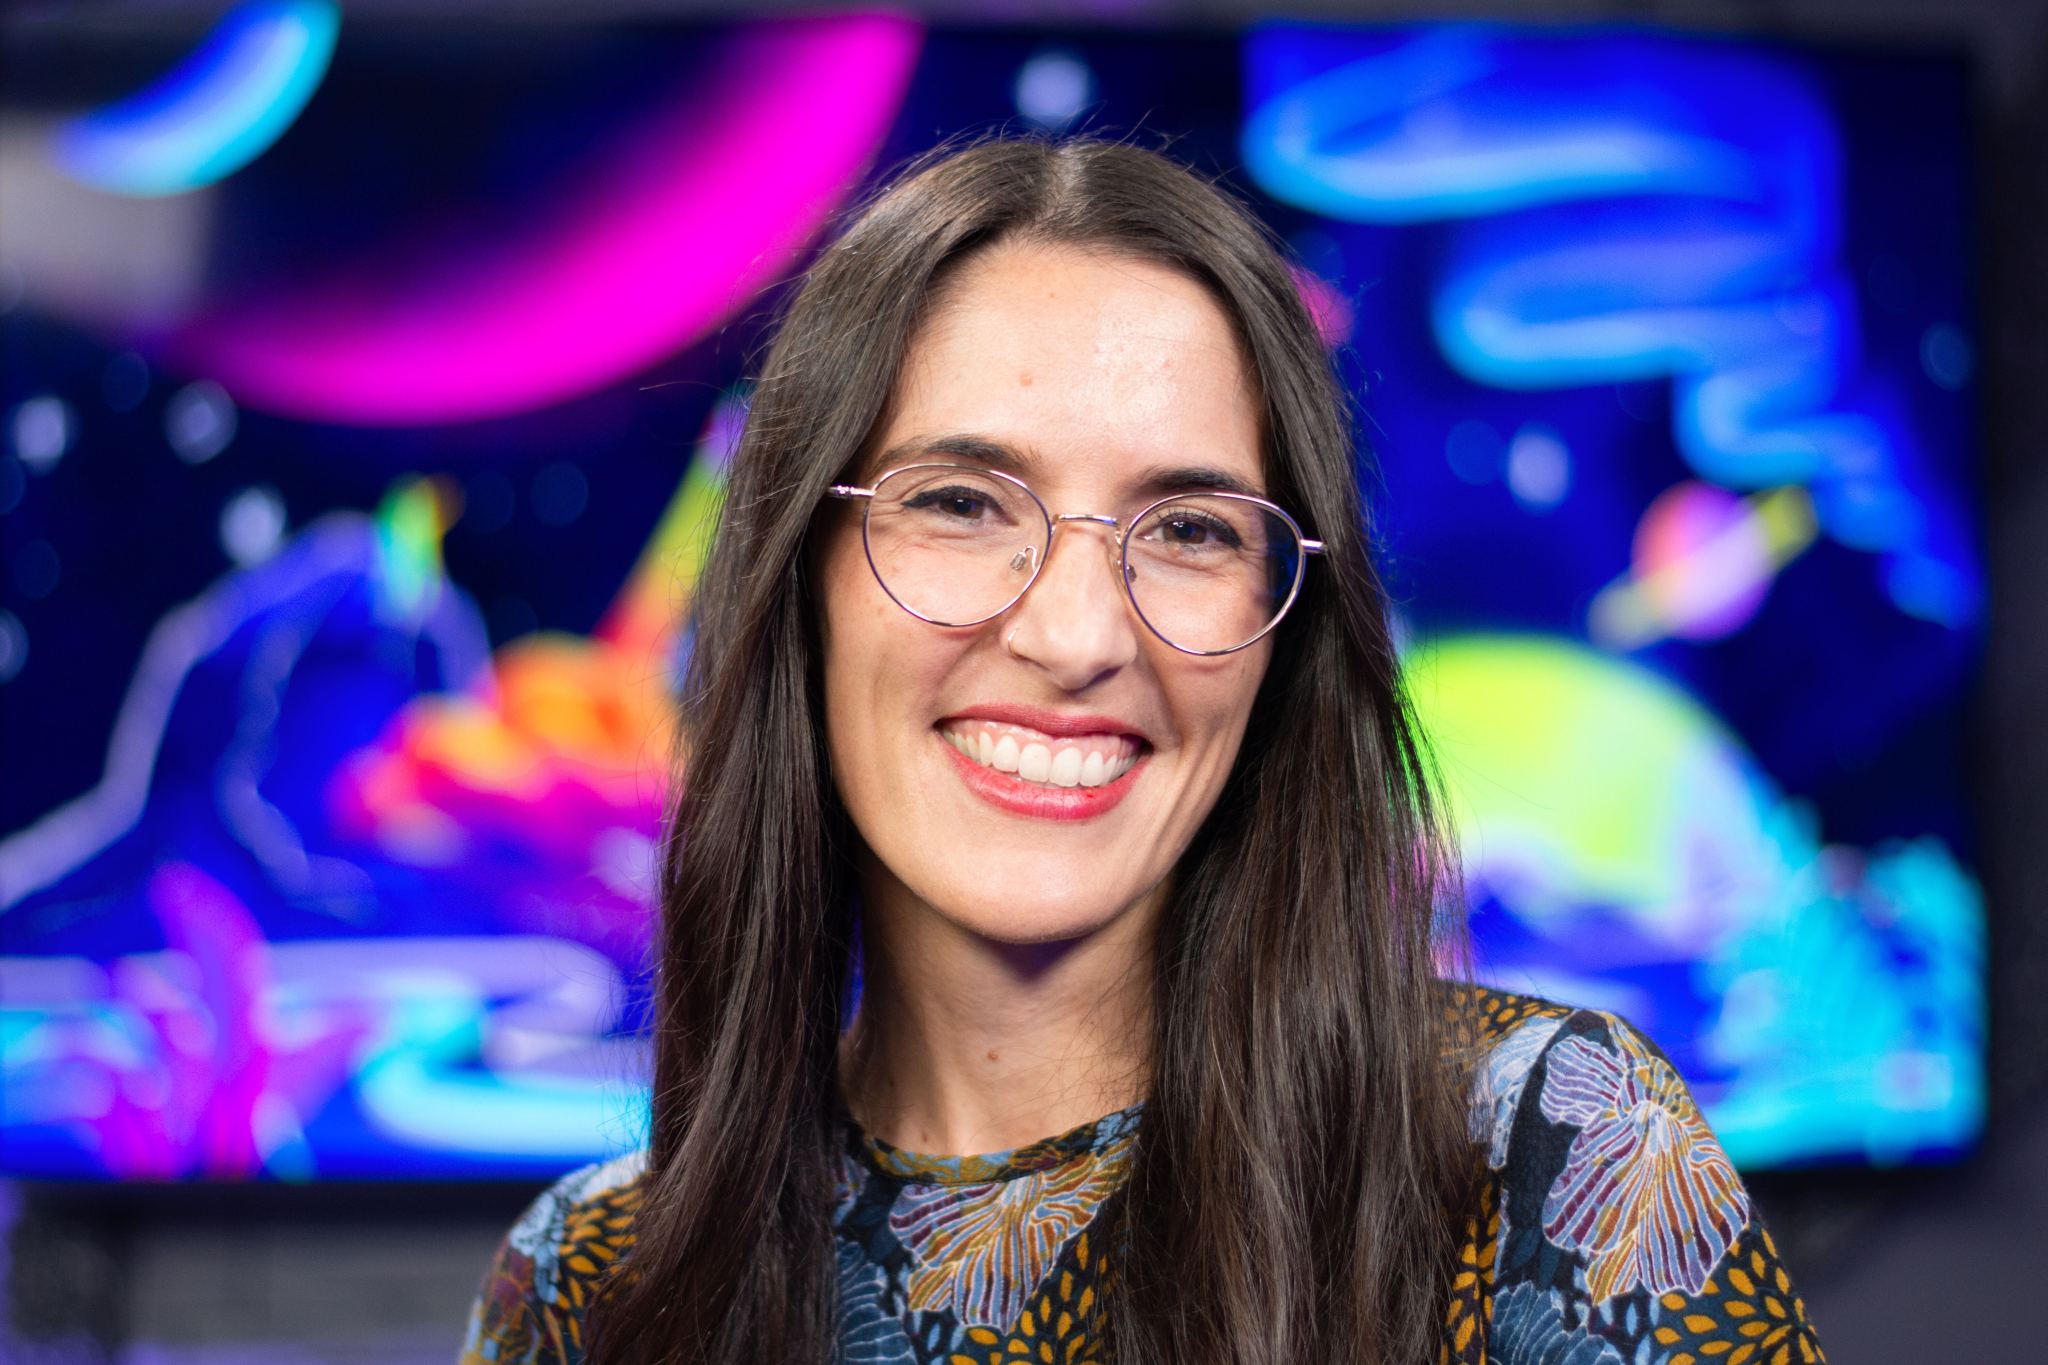 Noelia González smiles widely in the center of the frame. She is wearing large round glasses and a multicolored top of blues and oranges with a flower pattern, and her dark brown hair frames her face. Behind her is the brightly colored artwork for "Universo Curioso de la NASA," NASA’s first-ever Spanish podcast.